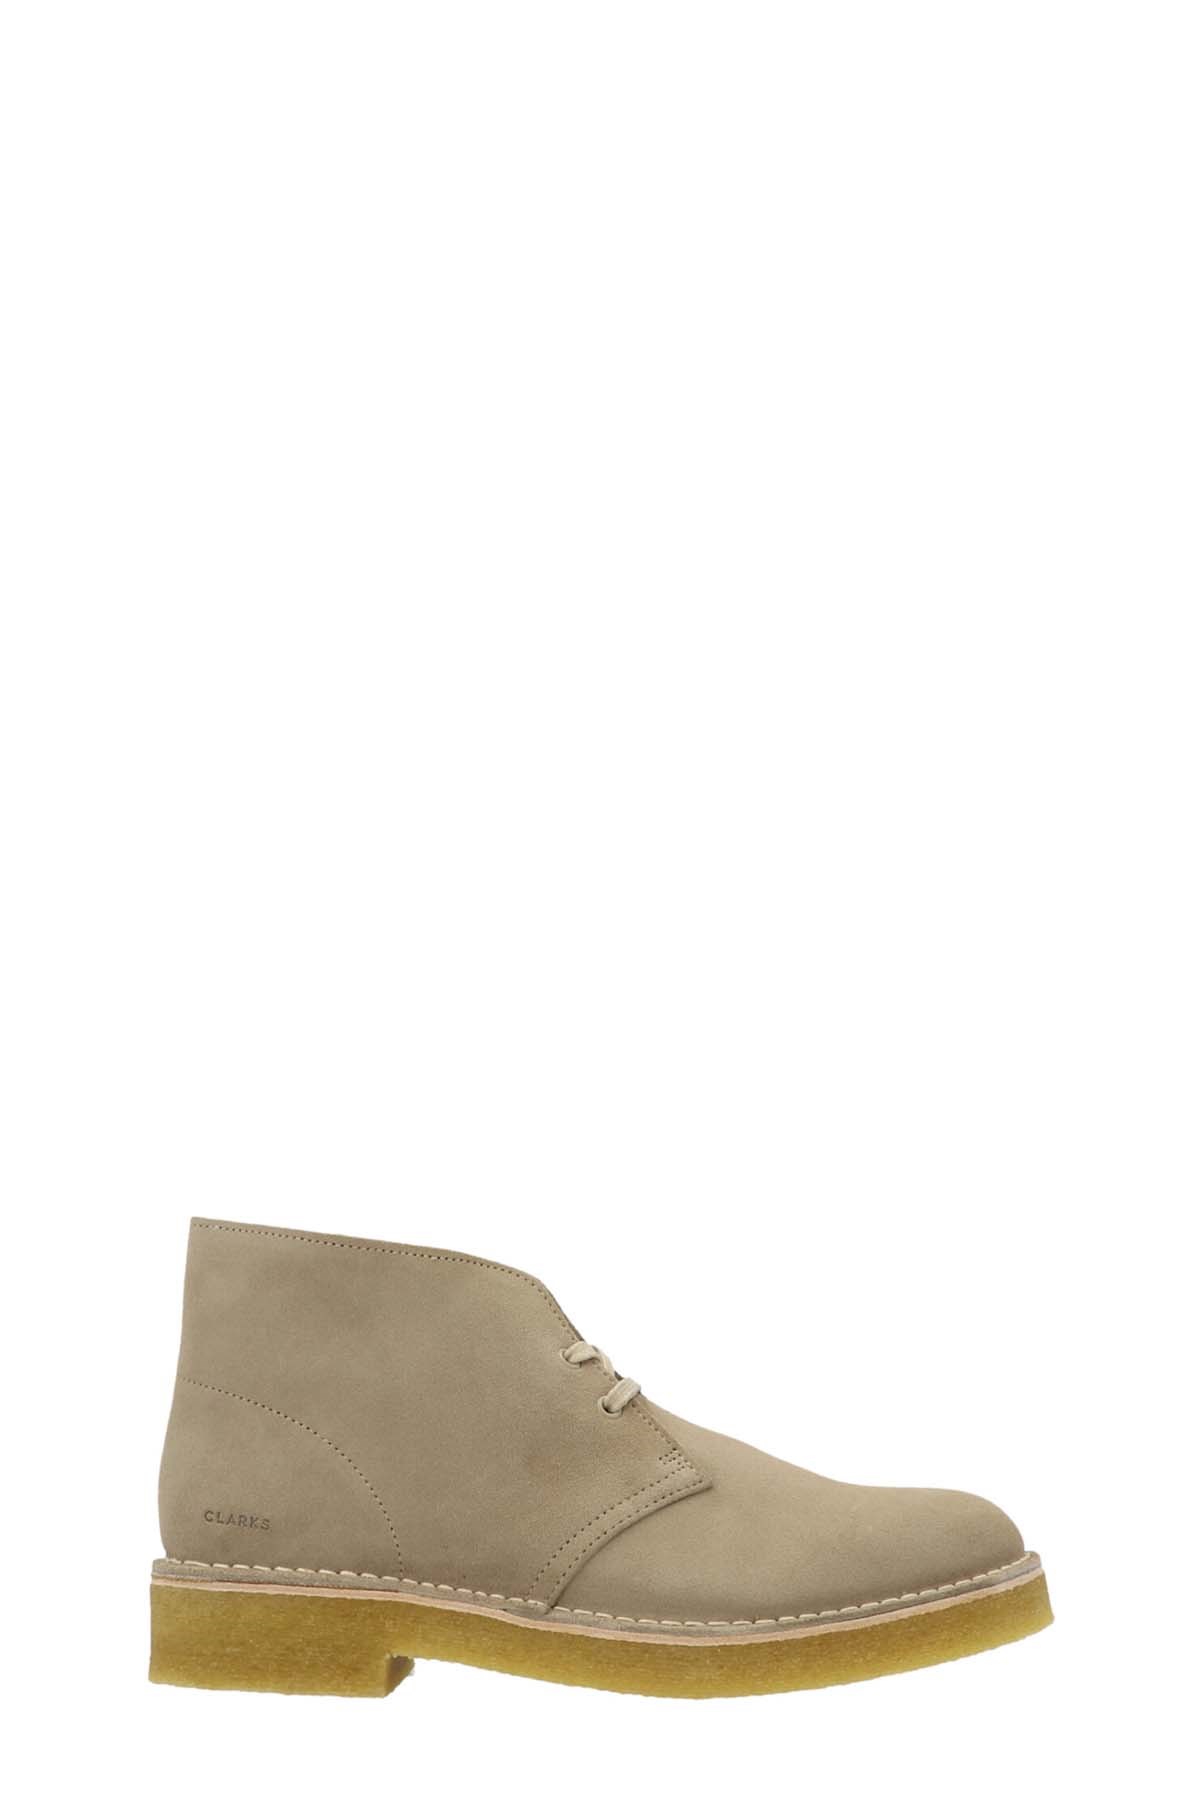 CLARKS ORIGINALS	 'Desert Boot 221' Lace-Up Ankle Boots